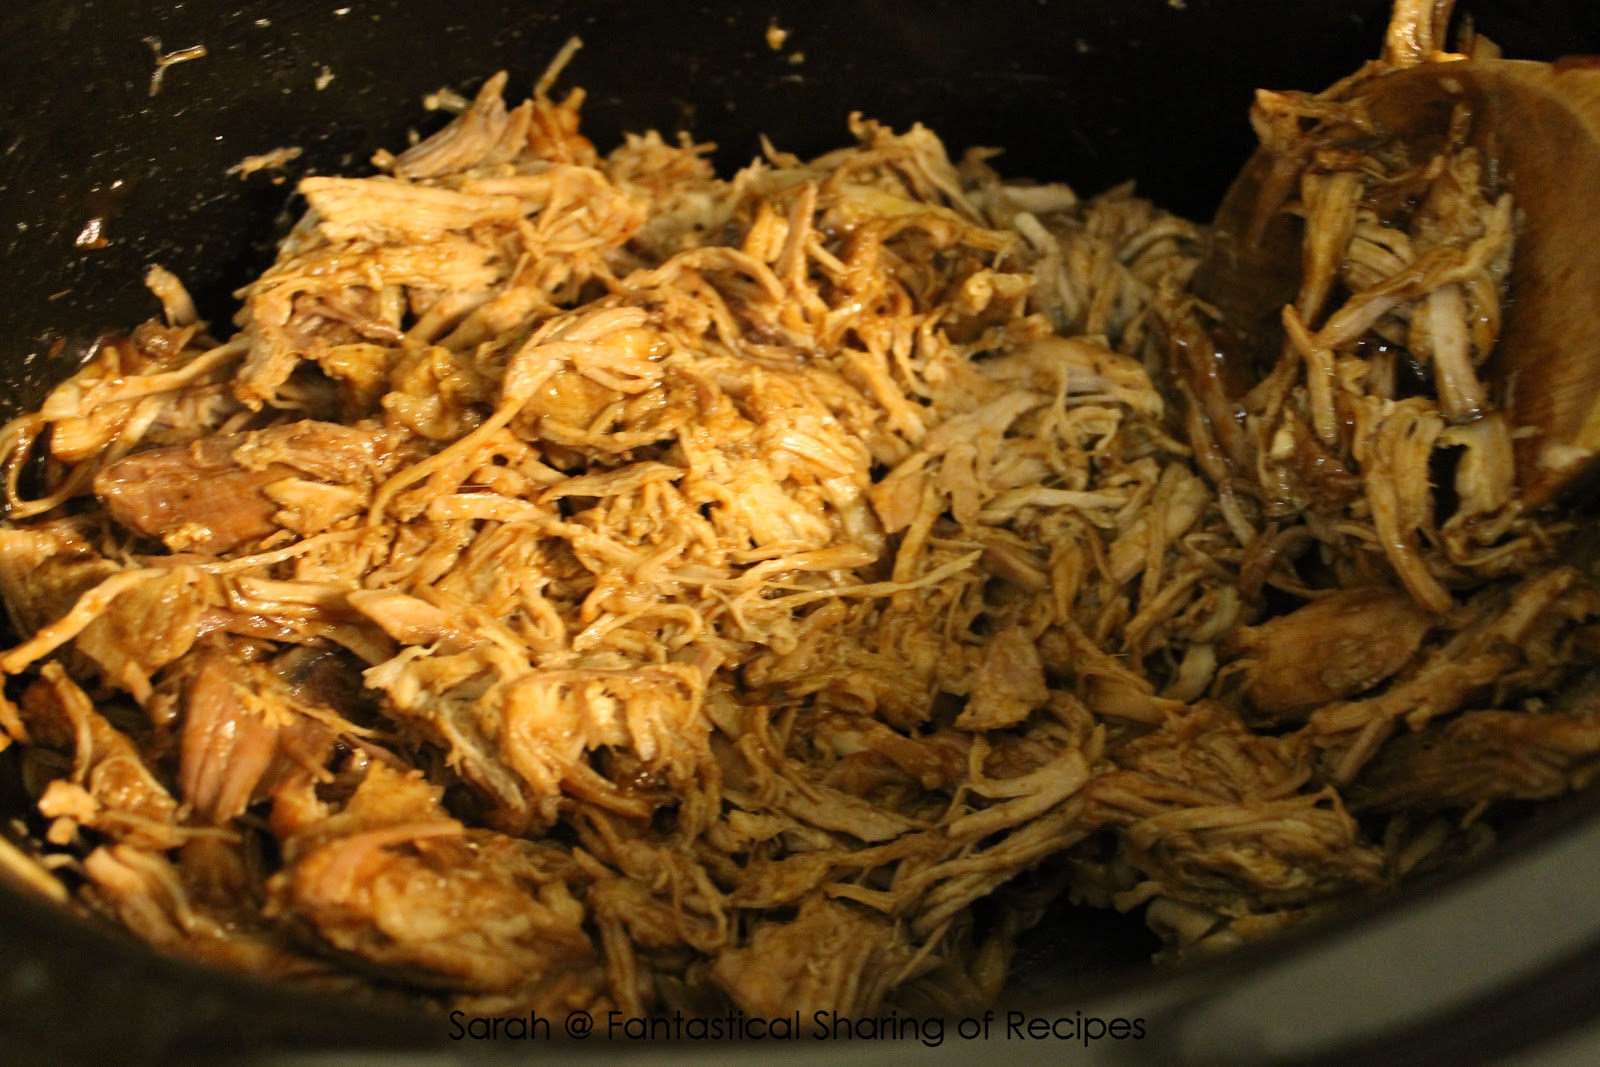 Fantastical Sharing of Recipes: BBQ Pulled Pork & Coleslaw Sandwiches